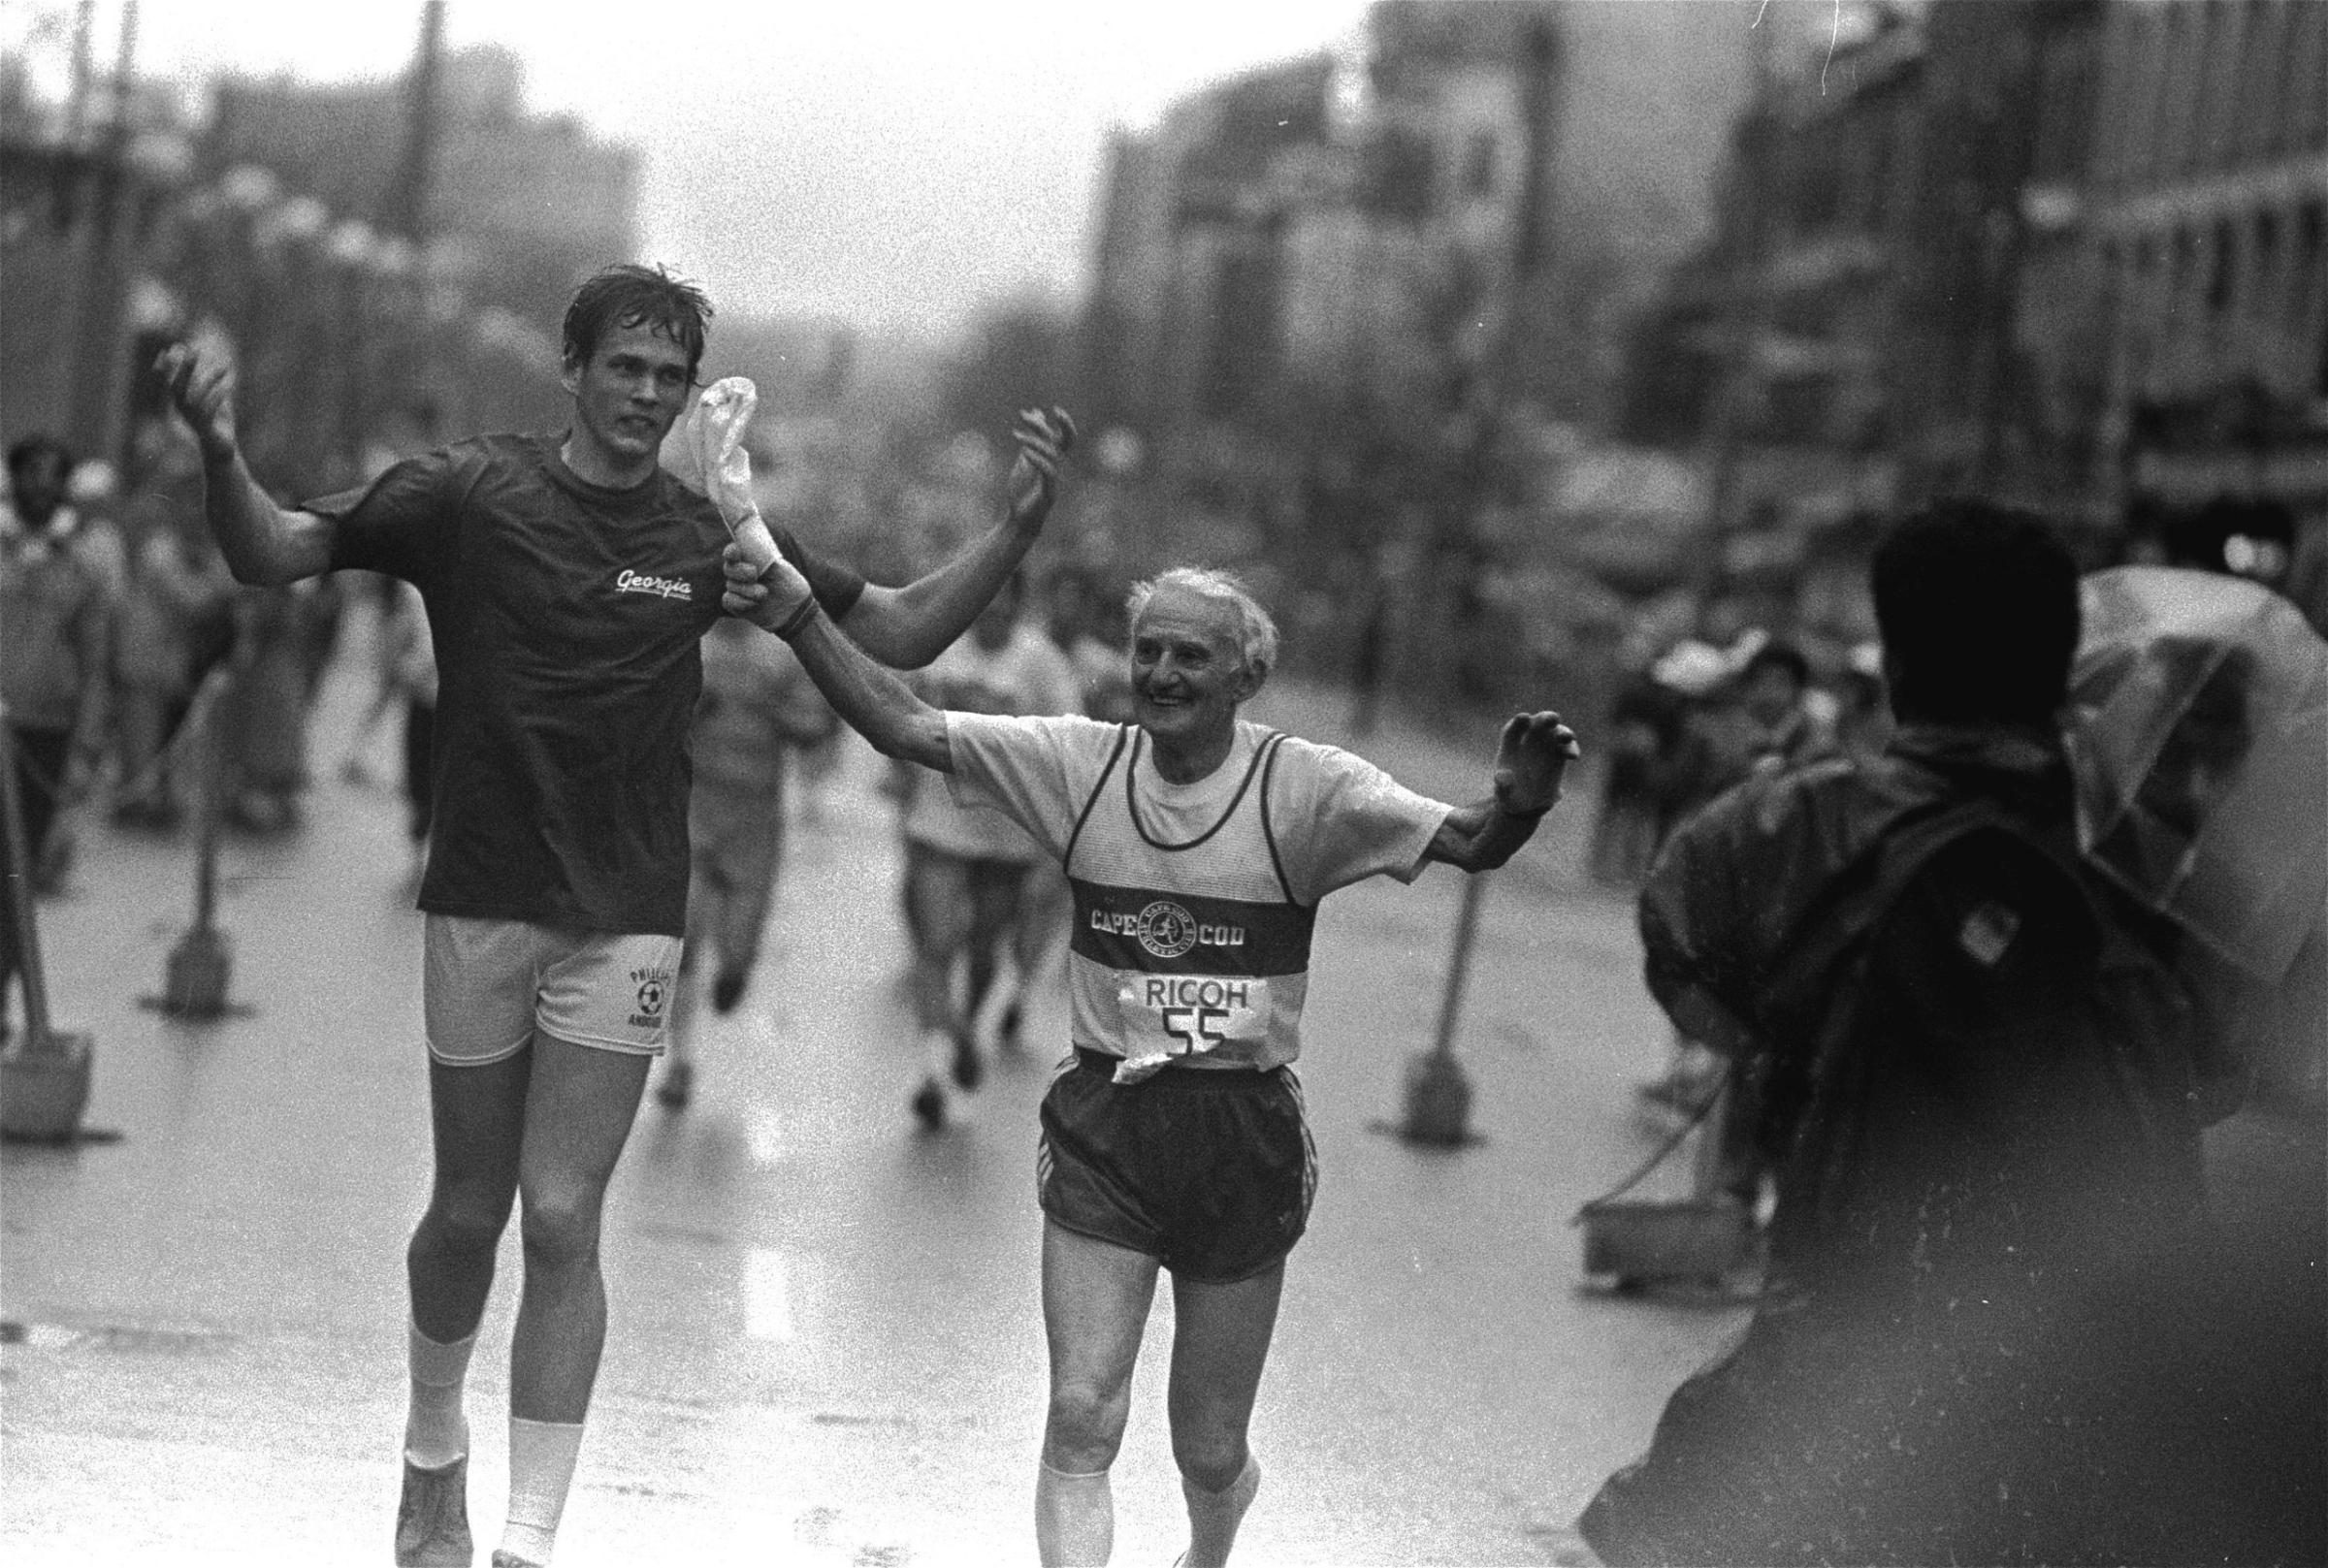 John A. Kelley, 78, smiles as he approaches the finish line at the 90th running of the Boston Marathon, April 21, 1986. Kelley's finish marked his 55th Boston Marathon.